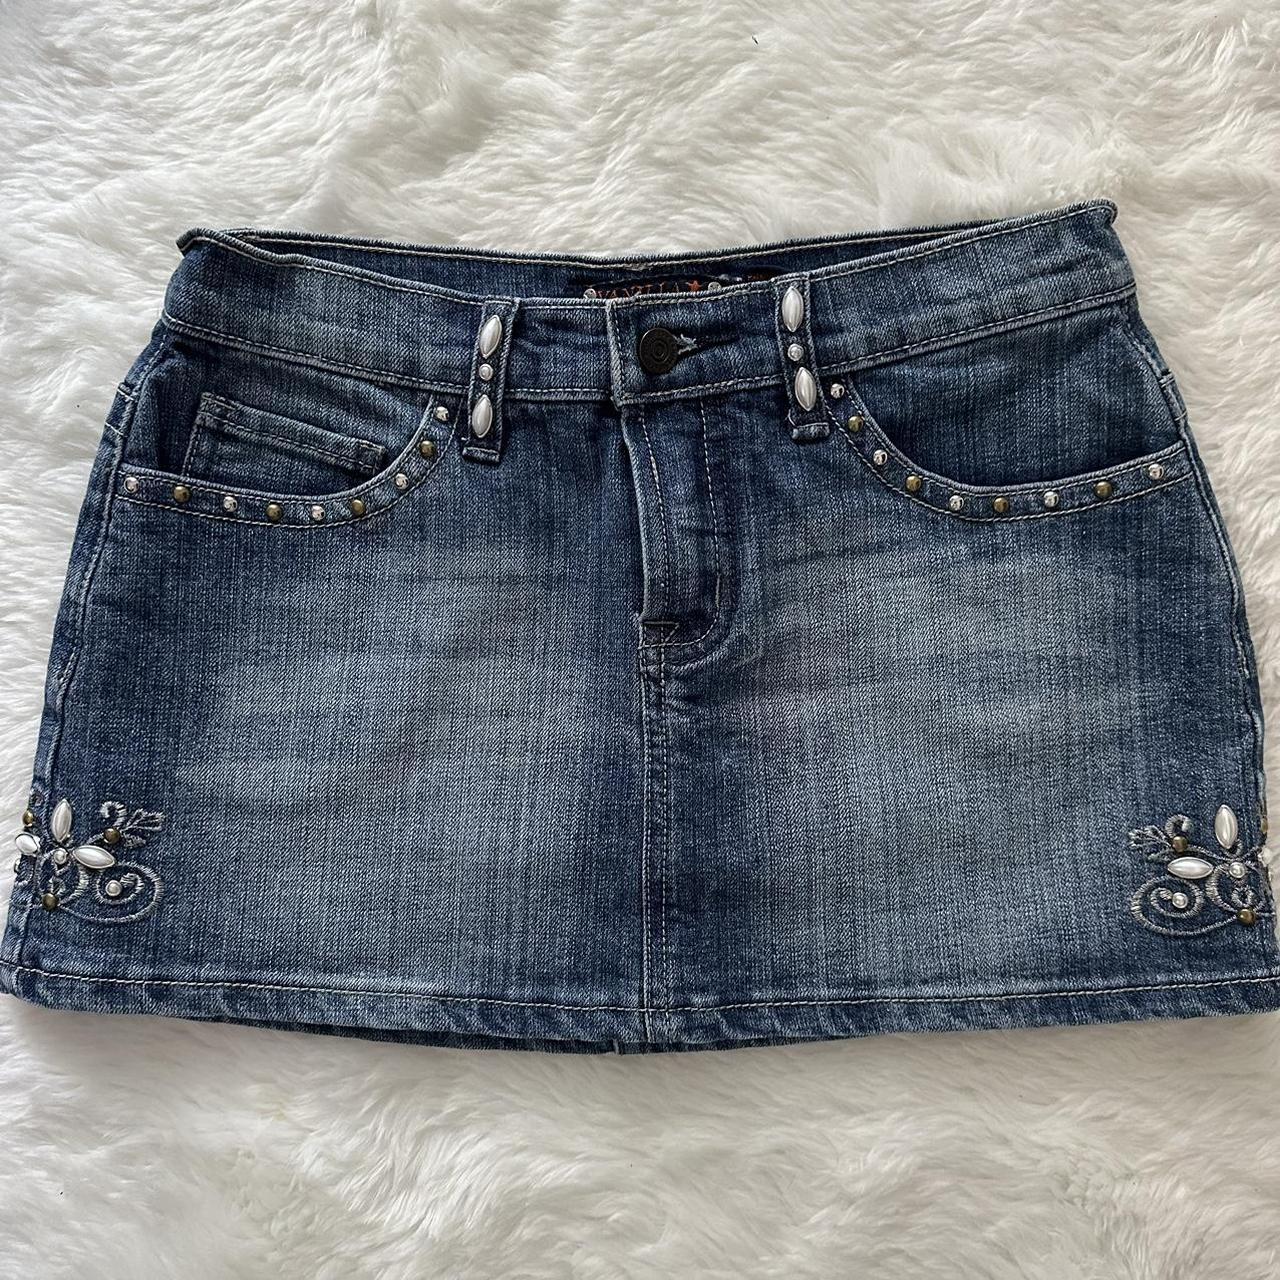 Early 2000s mini skirt Tagged a size 3 (see... - Depop